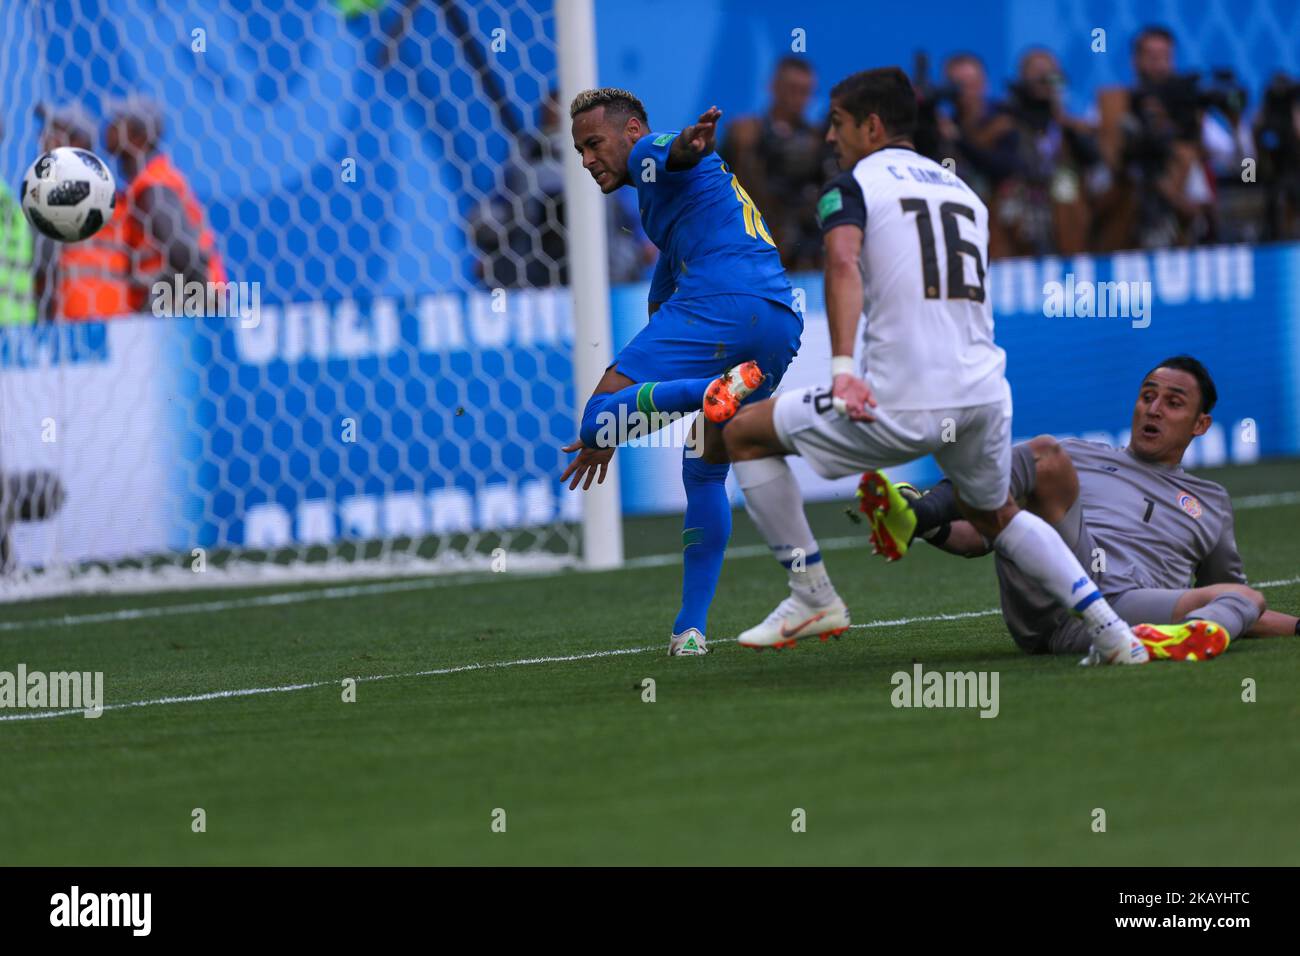 Neymar (L) of the Brazil national football team and Keylor Navas (R) of the Costa Rica national football team vie for the ball during the 2018 FIFA World Cup match, first stage - Group E between Brazil and Costa Rica at Saint Petersburg Stadium on June 22, 2018 in St. Petersburg, Russia. (Photo by Igor Russak/NurPhoto) Stock Photo